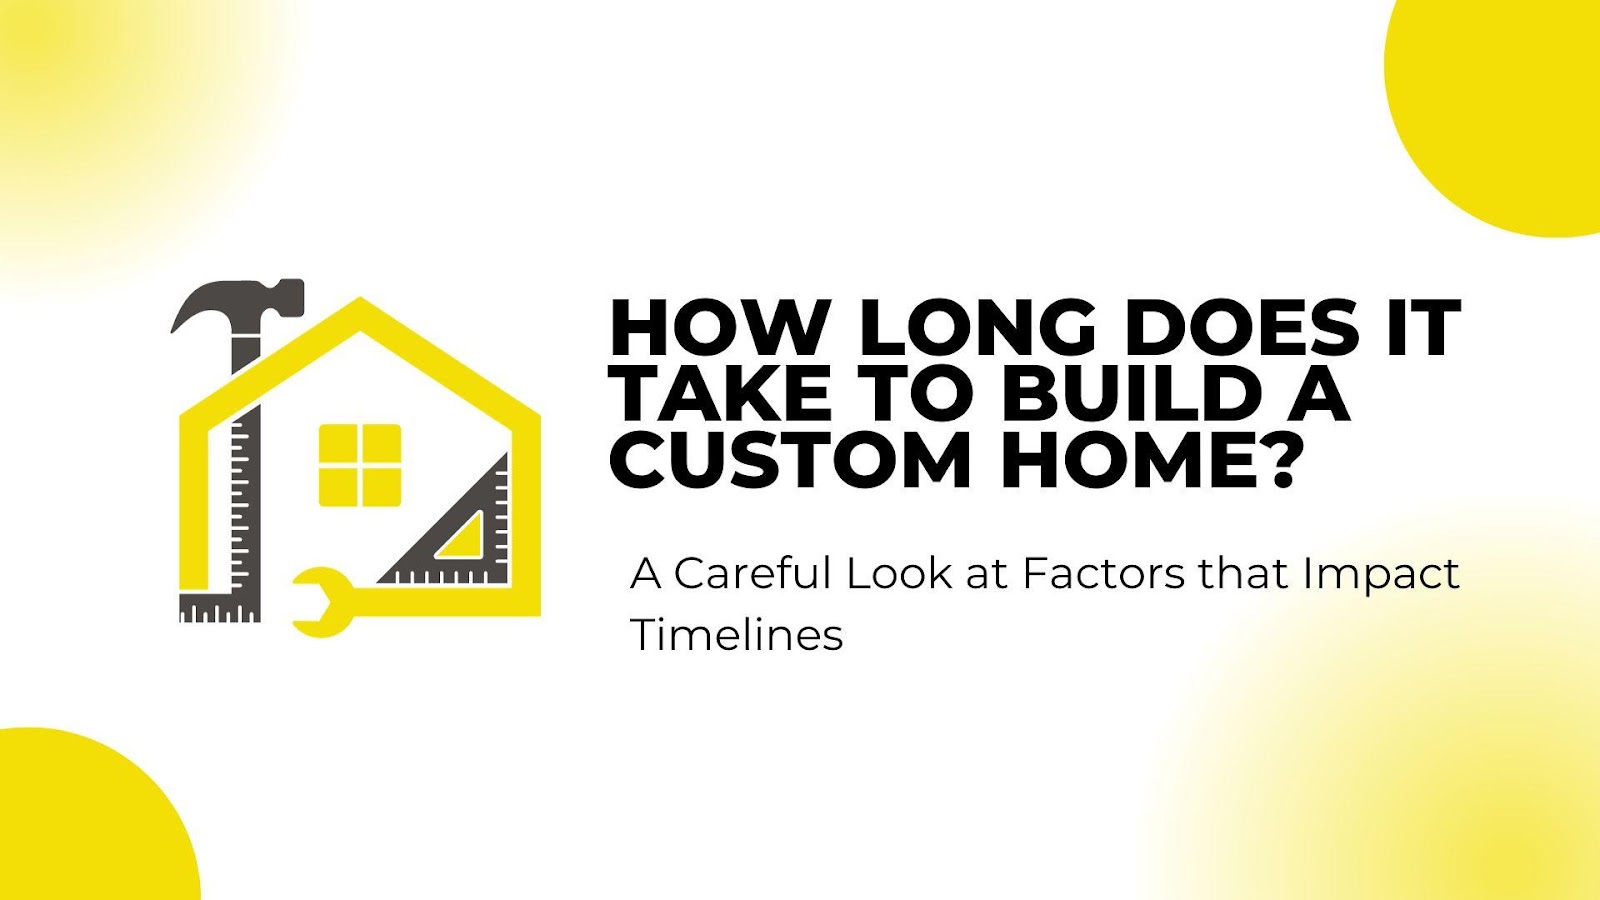 How Long Does It Take To Build a Custom Home? A Careful Look at Factors That Impact Timelines